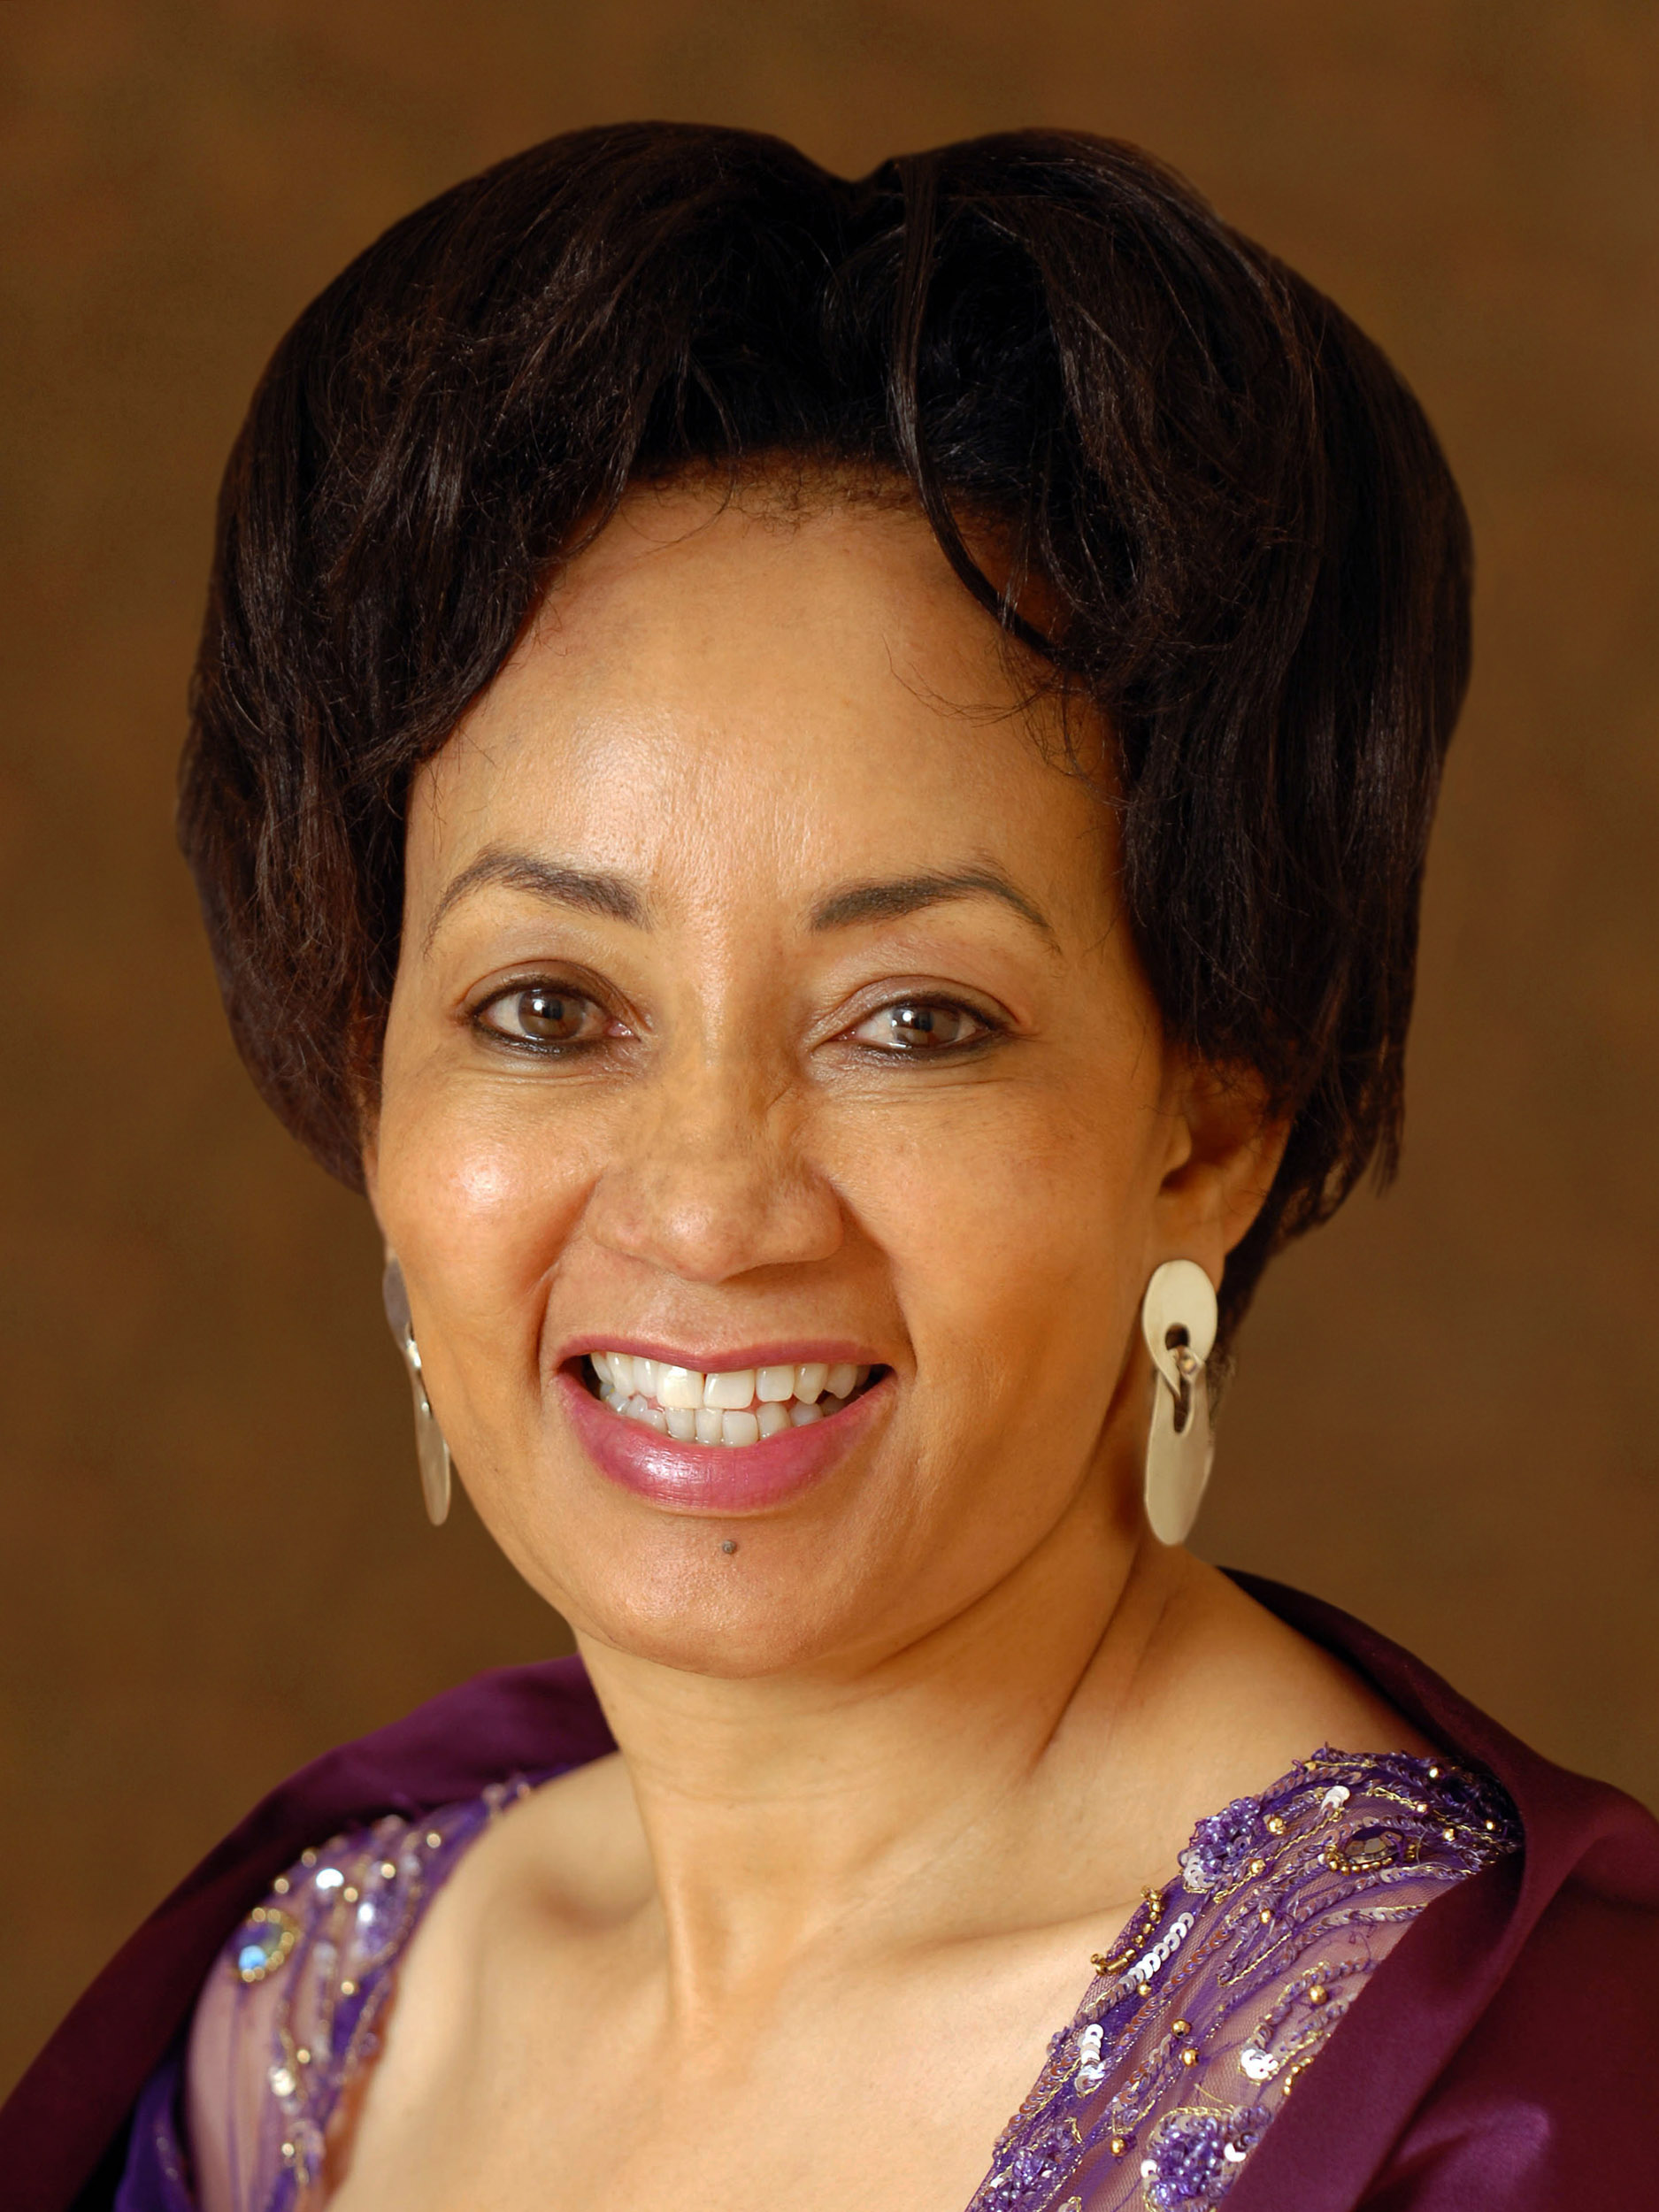 Proposed closure of Numbi Gate: Minister of Tourism Lindiwe Sisulu sets the record straight